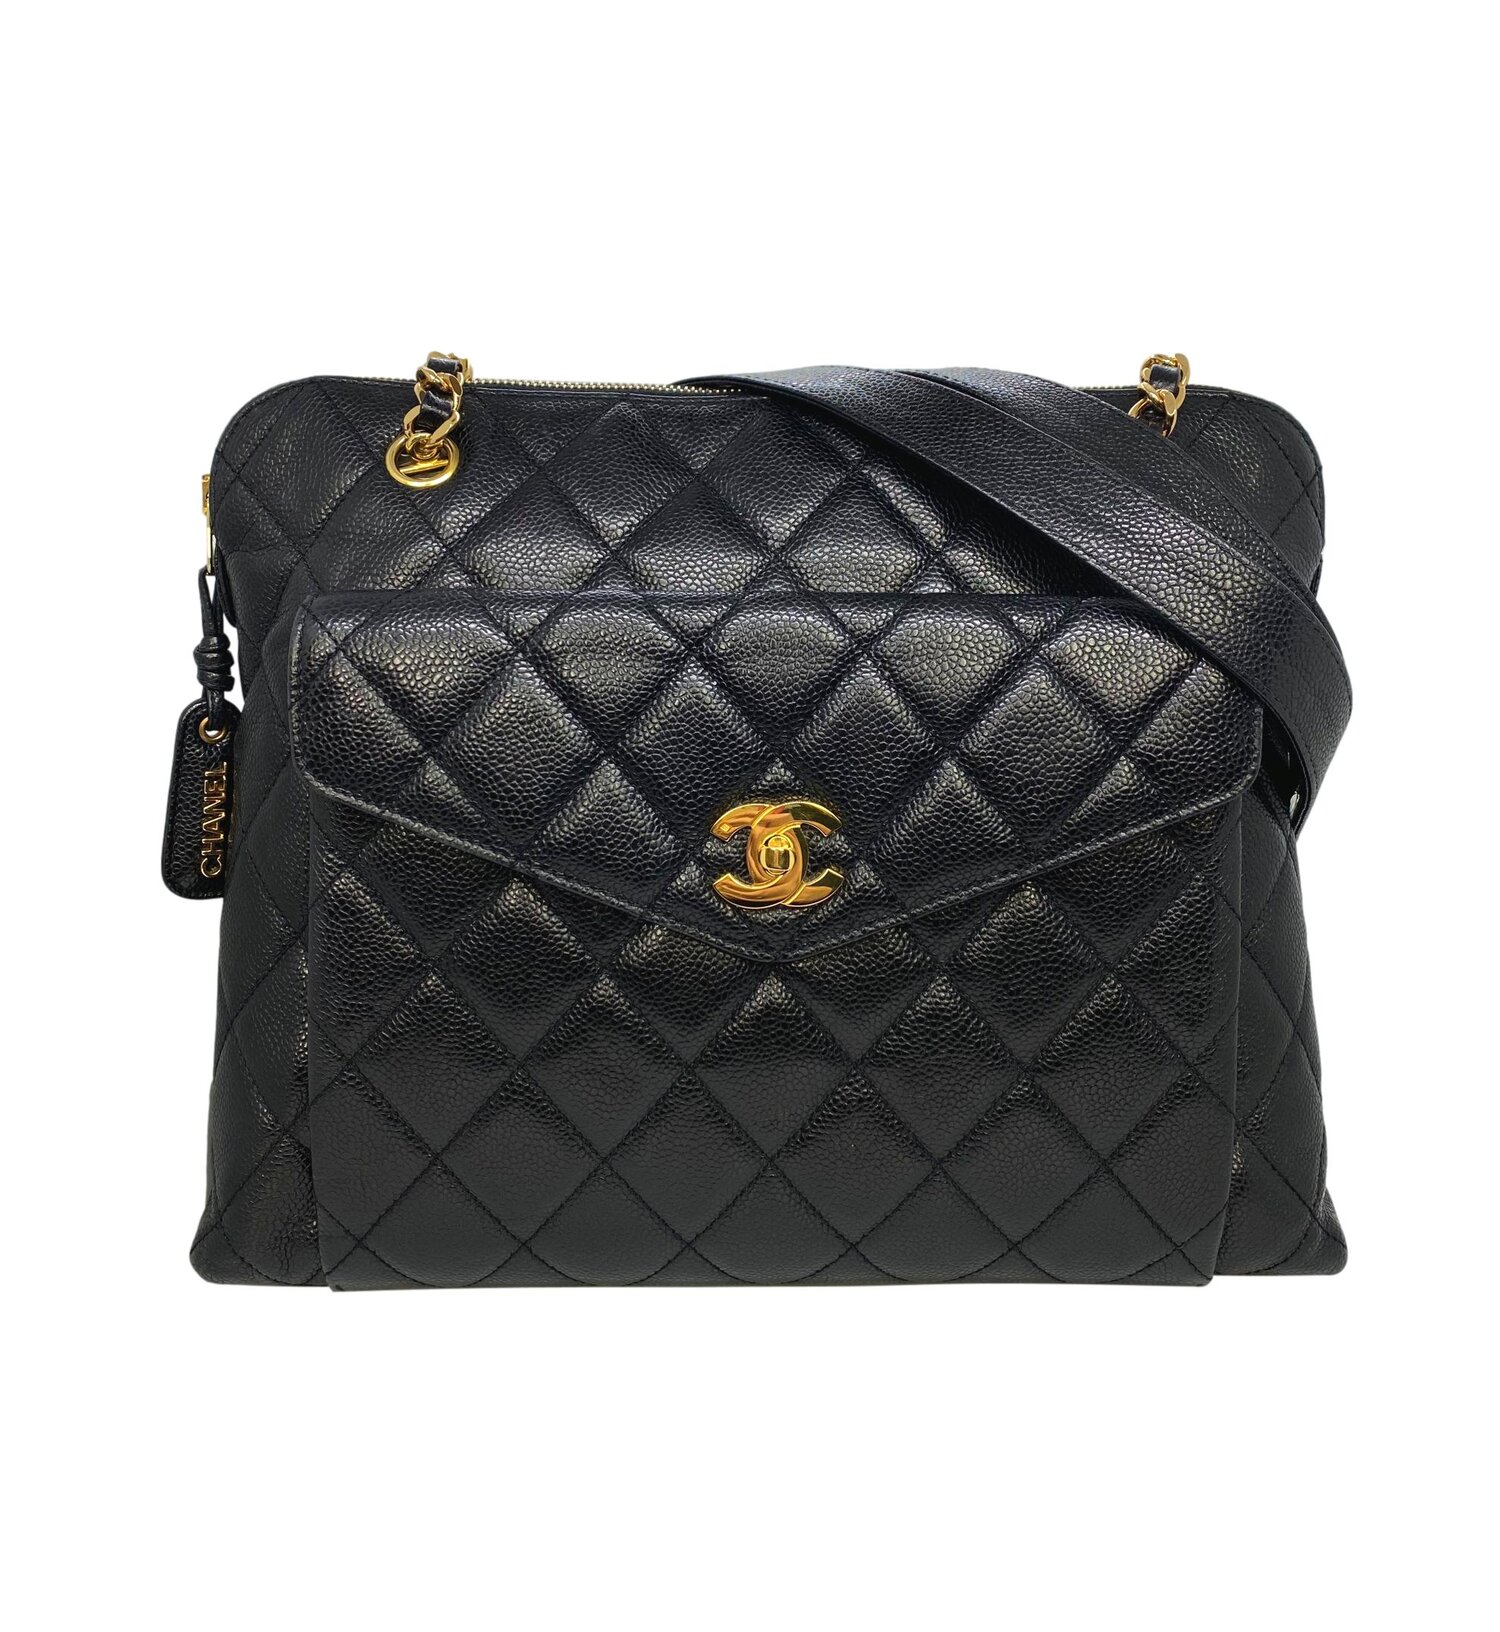 Chanel Black Caviar Quilted Timeless Pochette Shoulder Bag - Mrs Vintage -  Selling Vintage Wedding Lace Dress / Gowns & Accessories from 1920s –  1990s. And many One of a kind Treasures